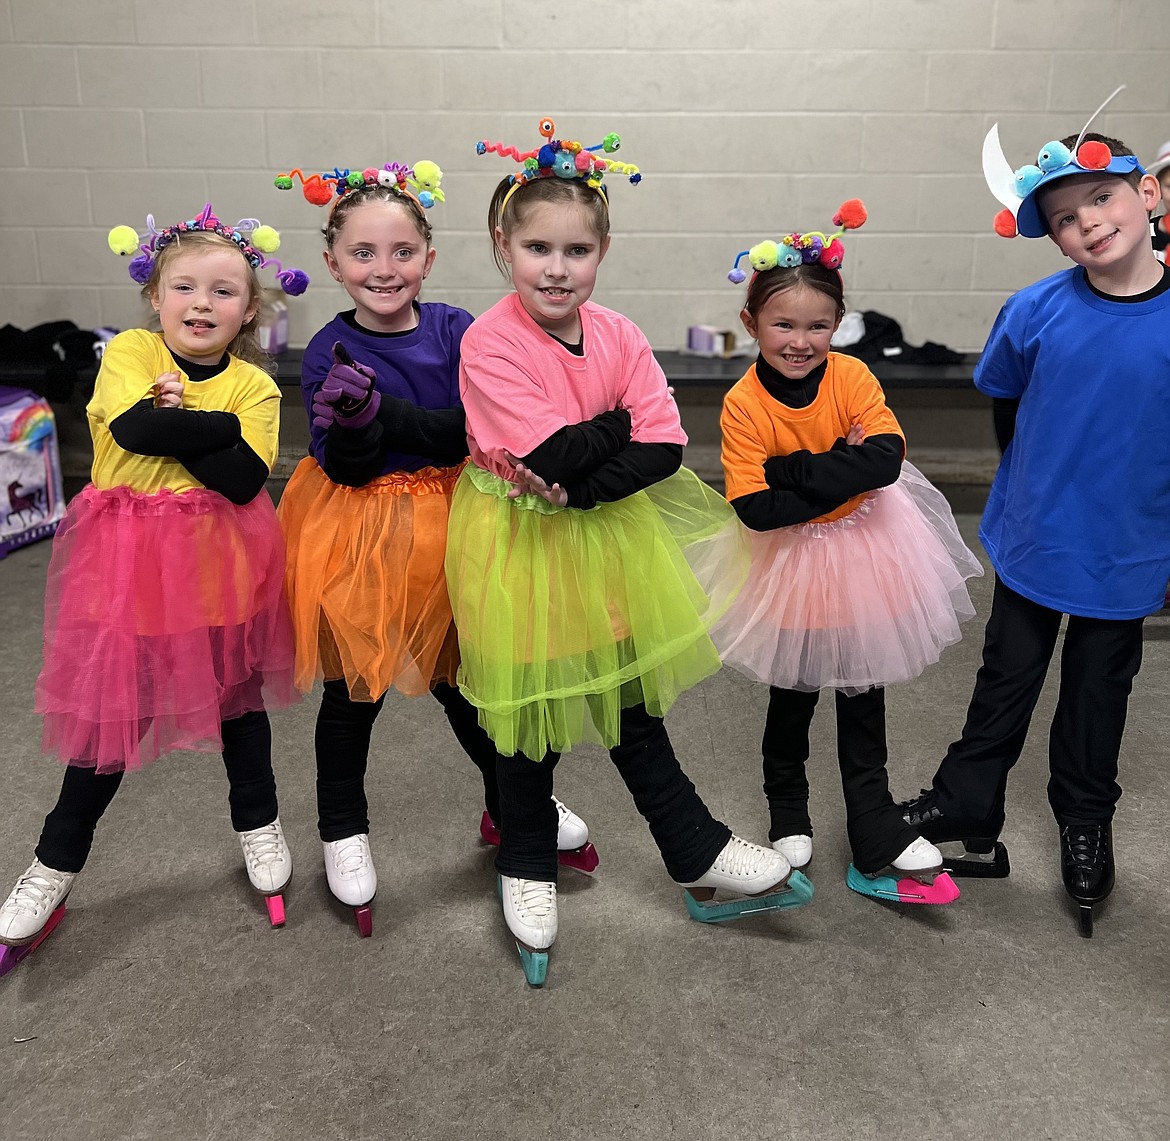 Courtesy photo 
The Little Dippers, Theatre on Ice: From left, Harper Sailor, Harley Kaiser, Isabella De La Rosa, Hazel Wolters and Logan Glass. All are part of the Lake City Figure Skating program of the Spokane Figure Skating Club, which hosted the Lake City Classic on May 17-19 at the Frontier Ice Arena in Coeur d'Alene.